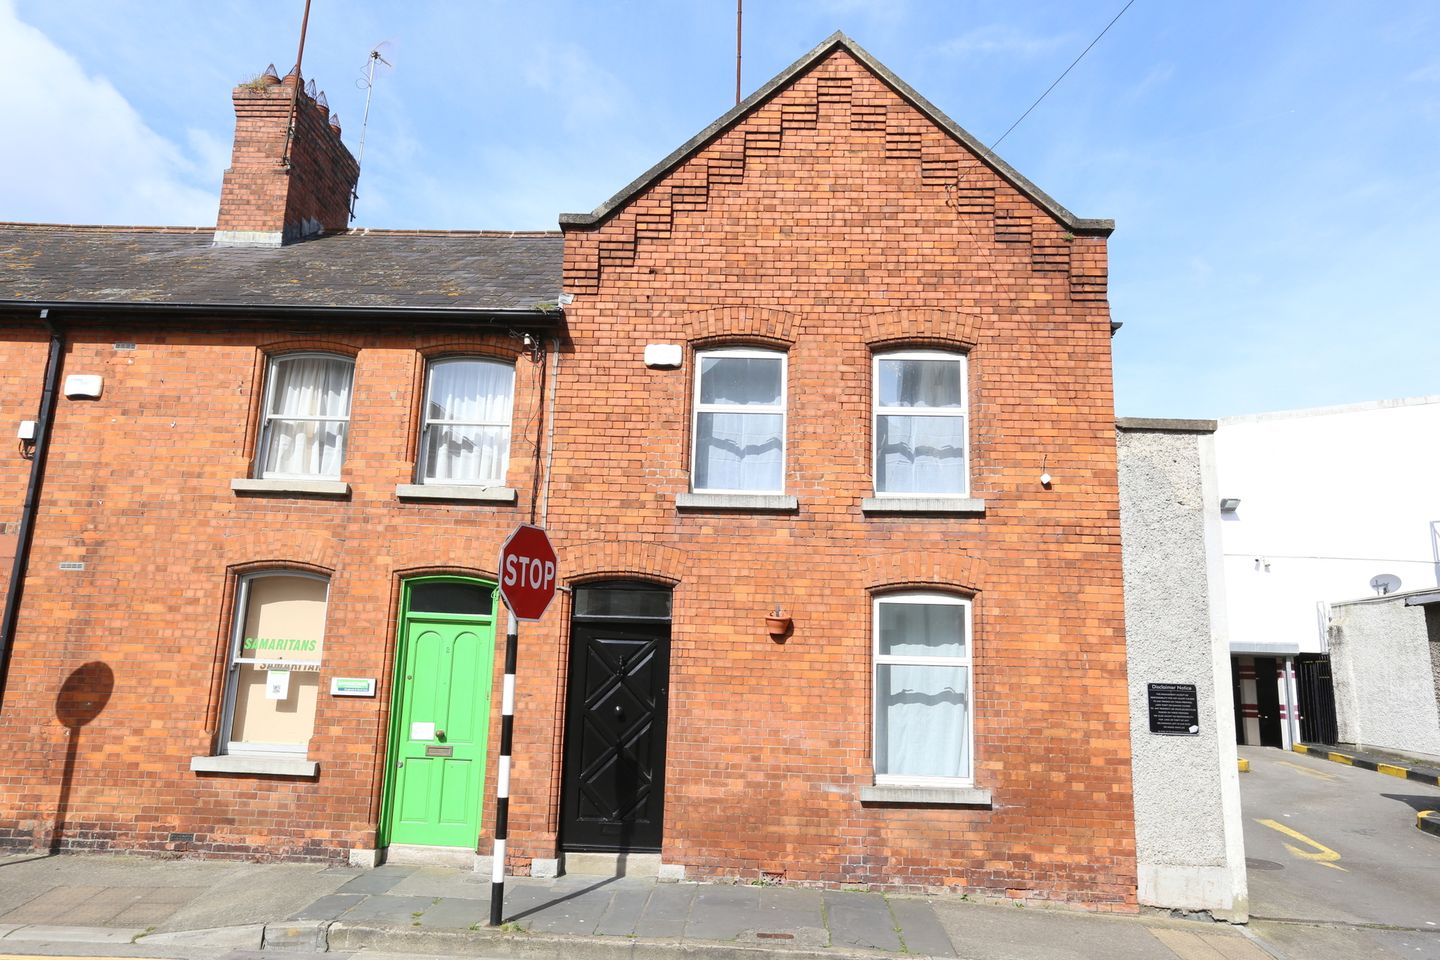 1 Leyland Place, Drogheda, Co. Louth, A92NH0V